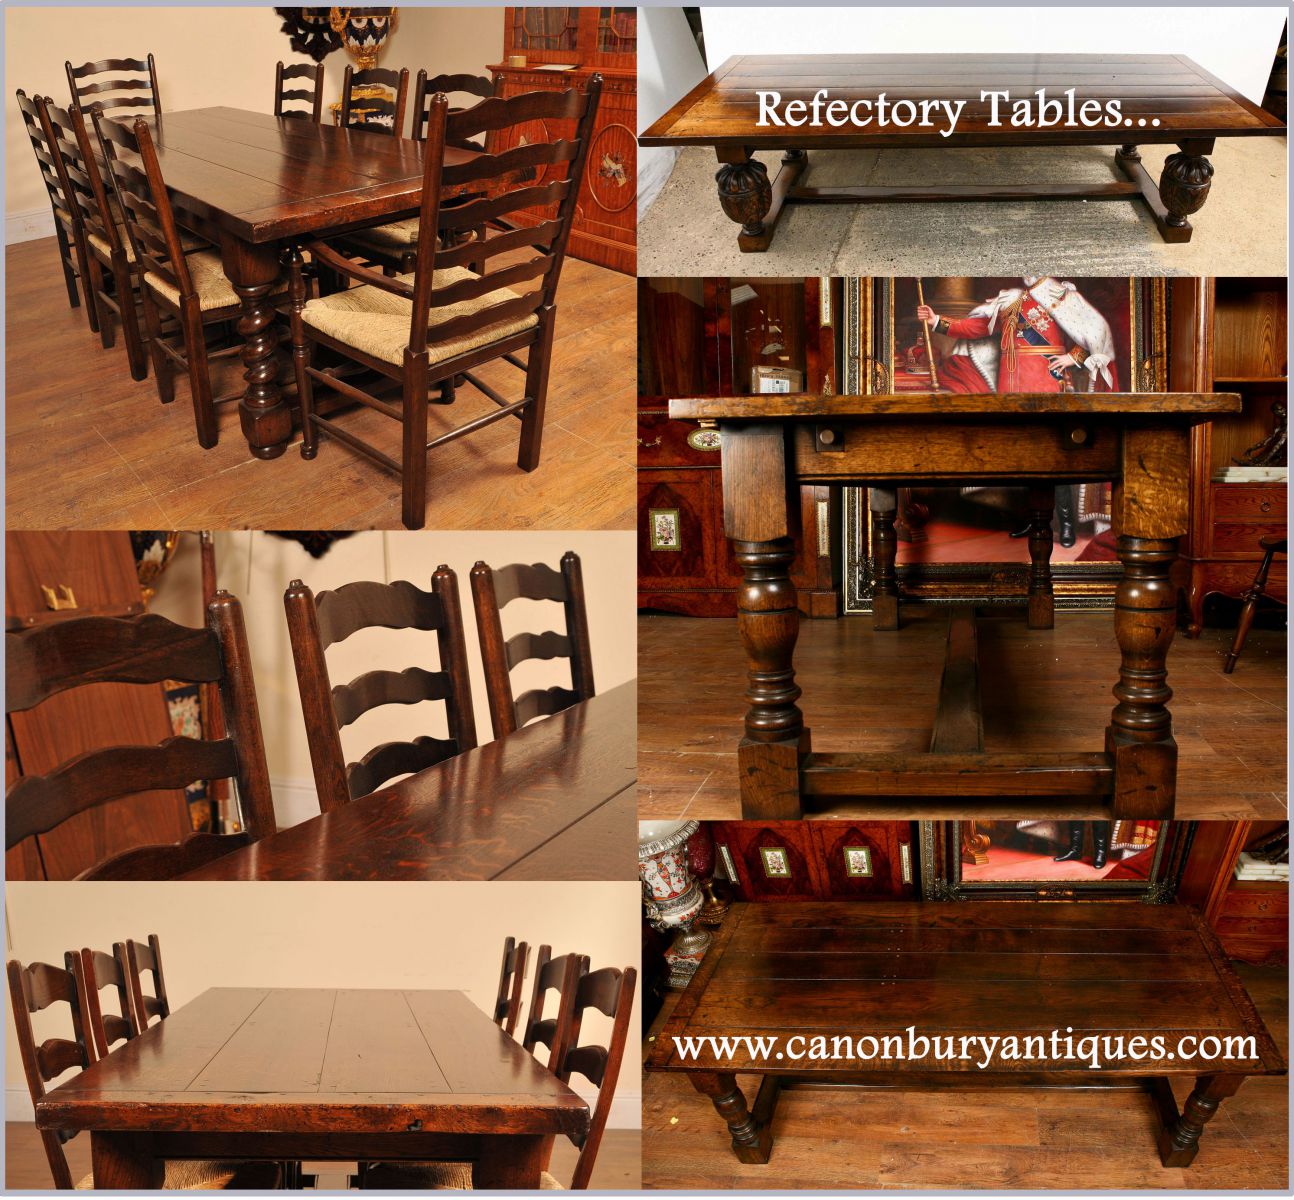 This set look superb around the refectory table with barley twist legs